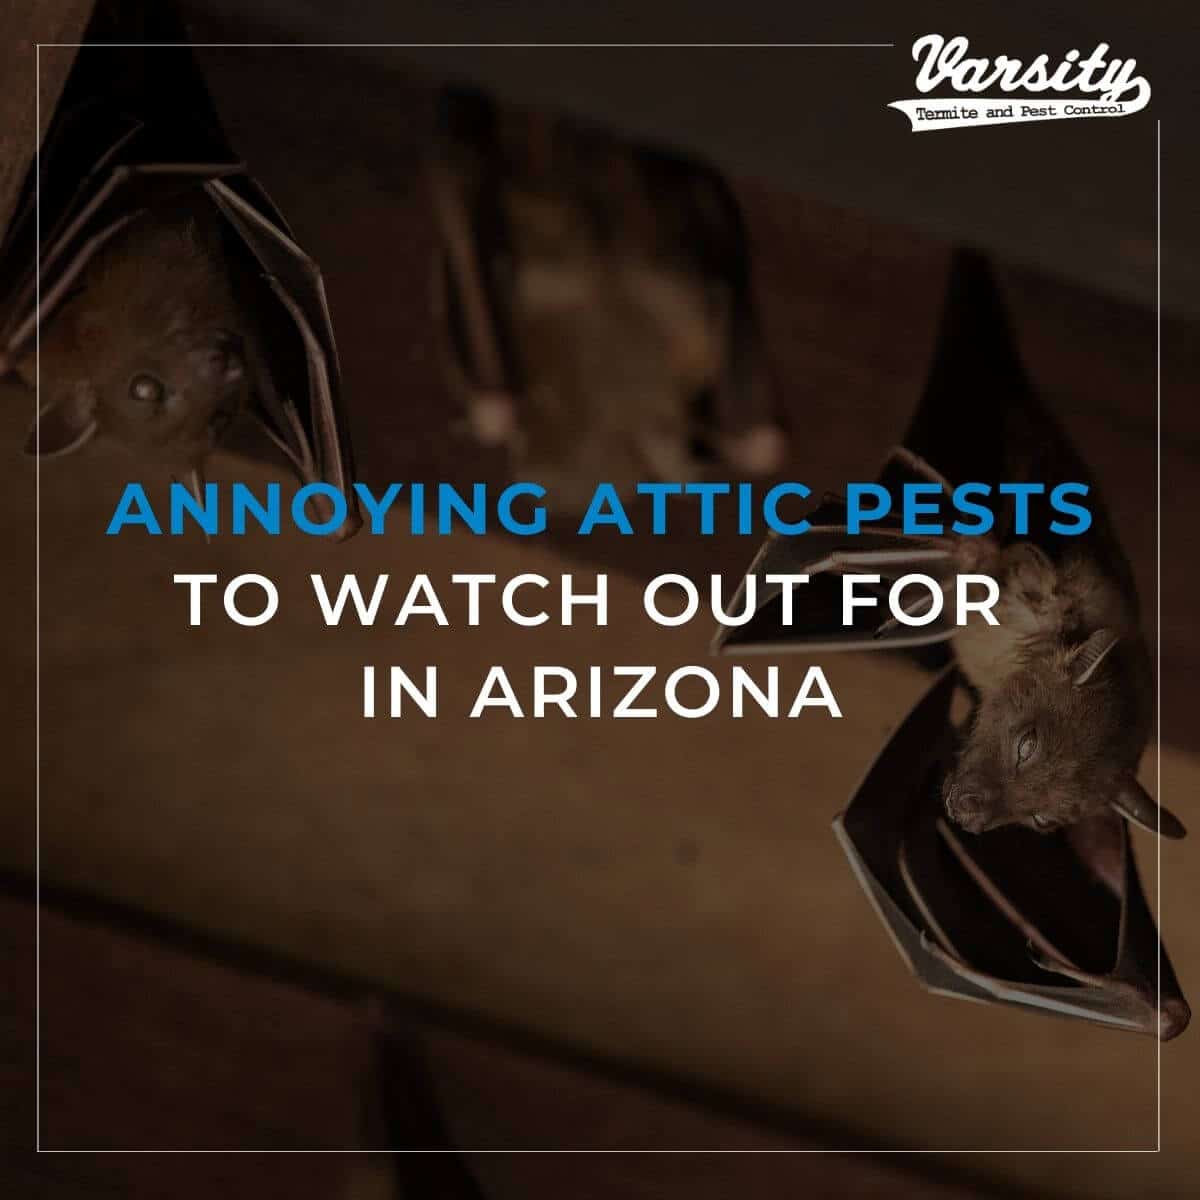 Annoying Attic Pests to Watch Out for in Arizona